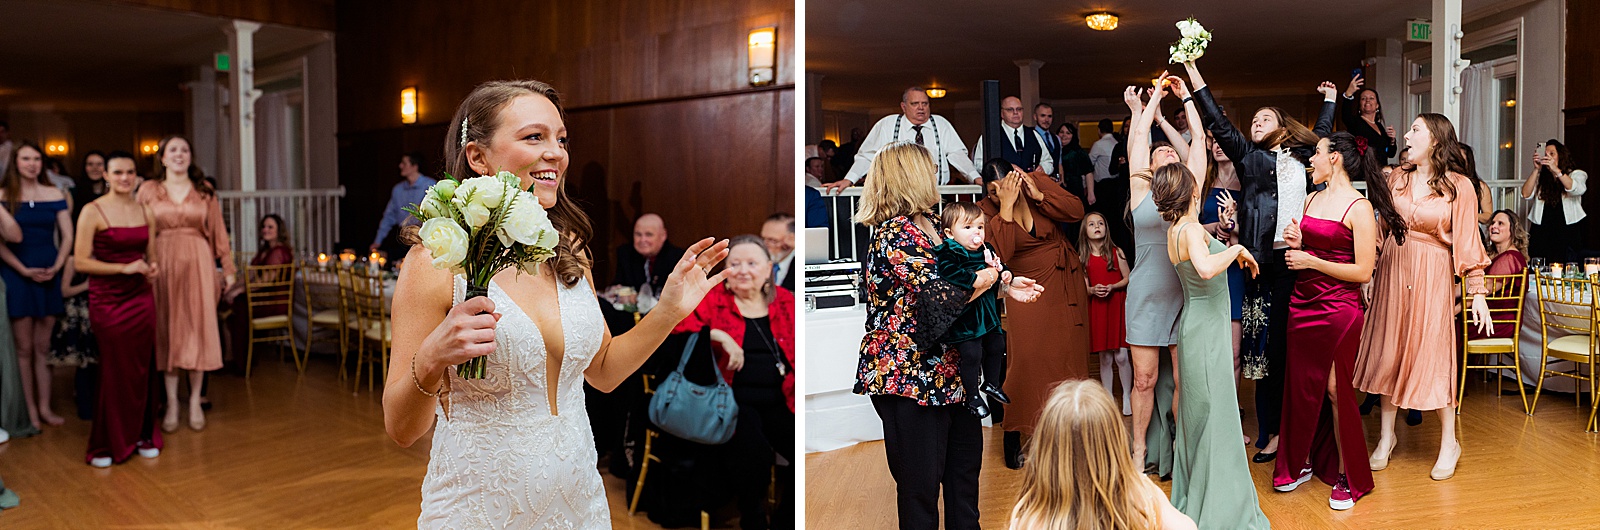 winter wedding at overhills mansion in Baltimore maryland bouquet toss